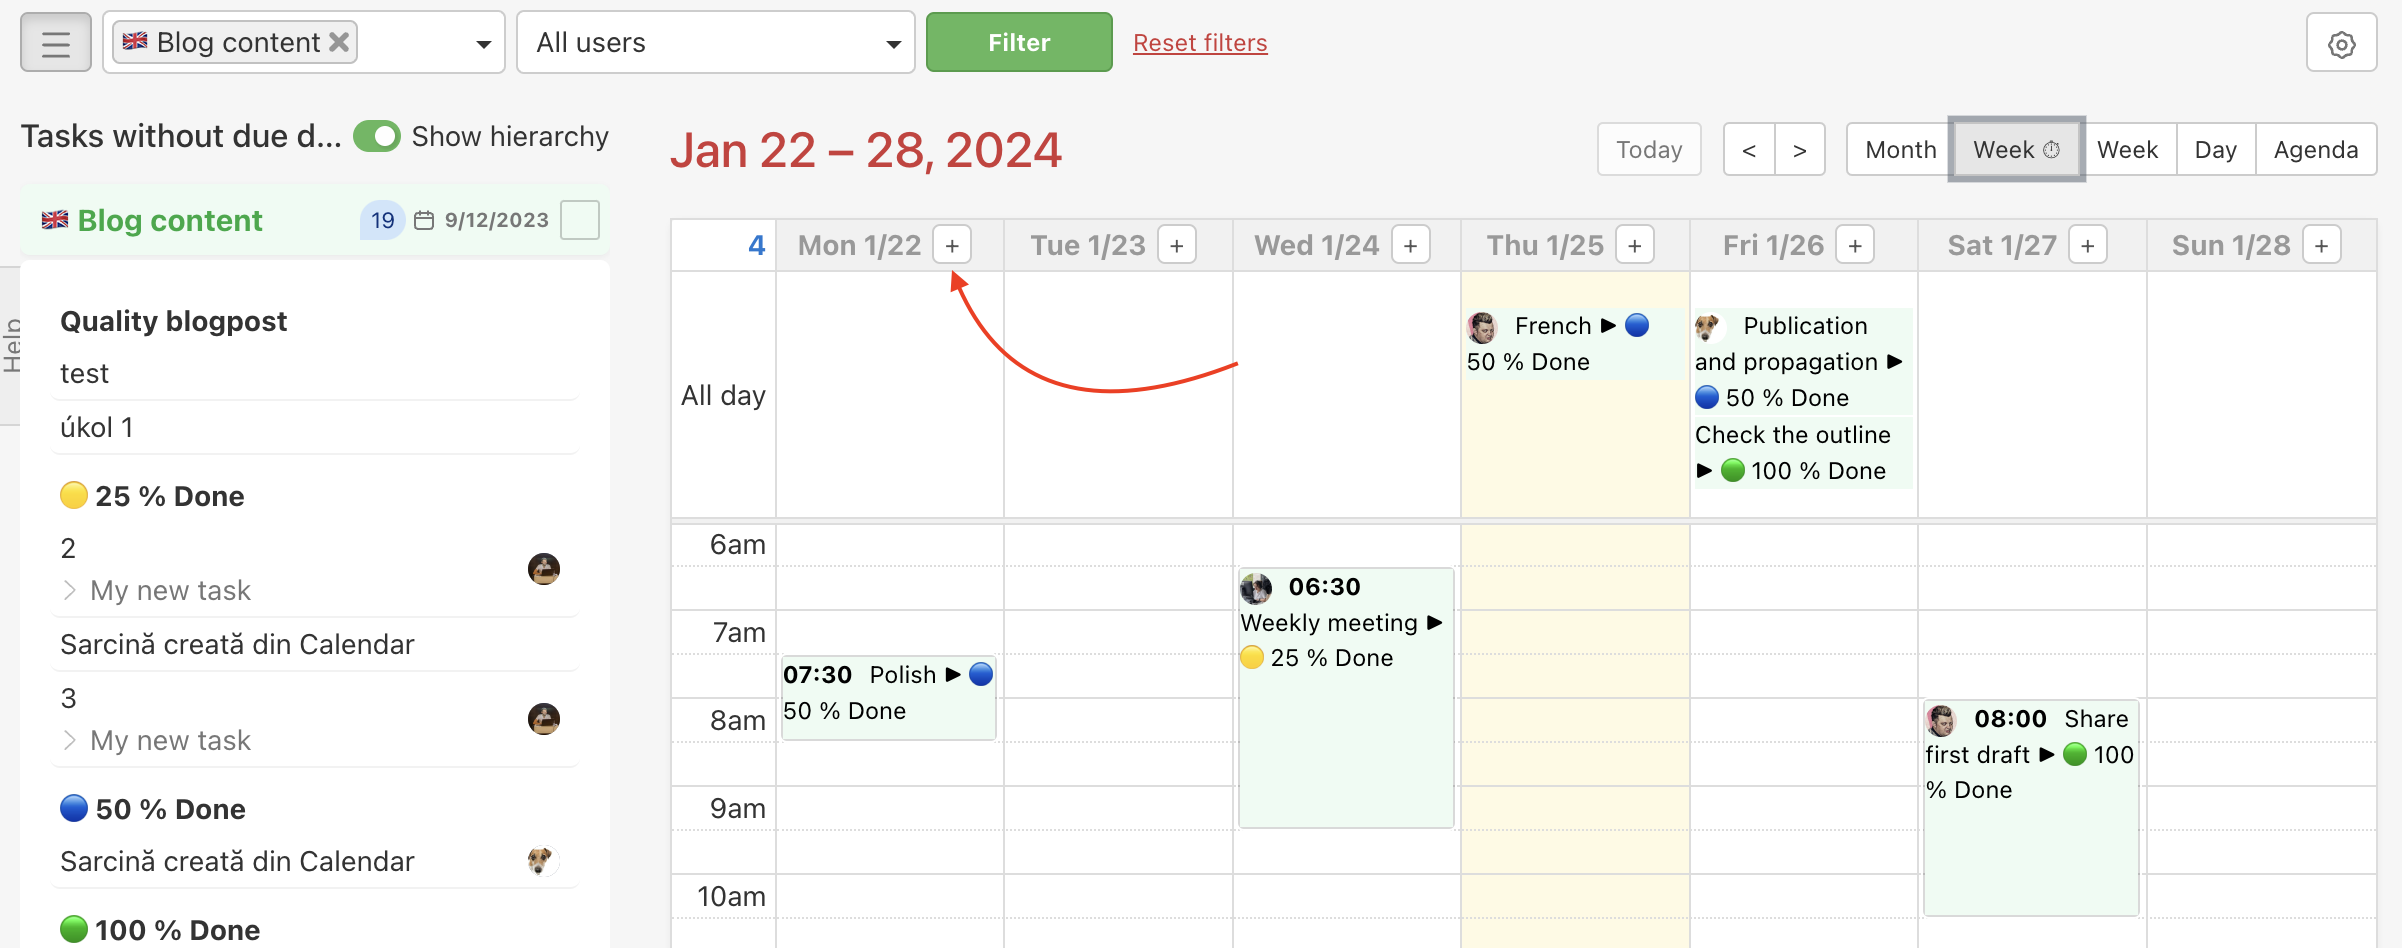 Example how to add a new task in the Calendar via the + button in the weekly view.